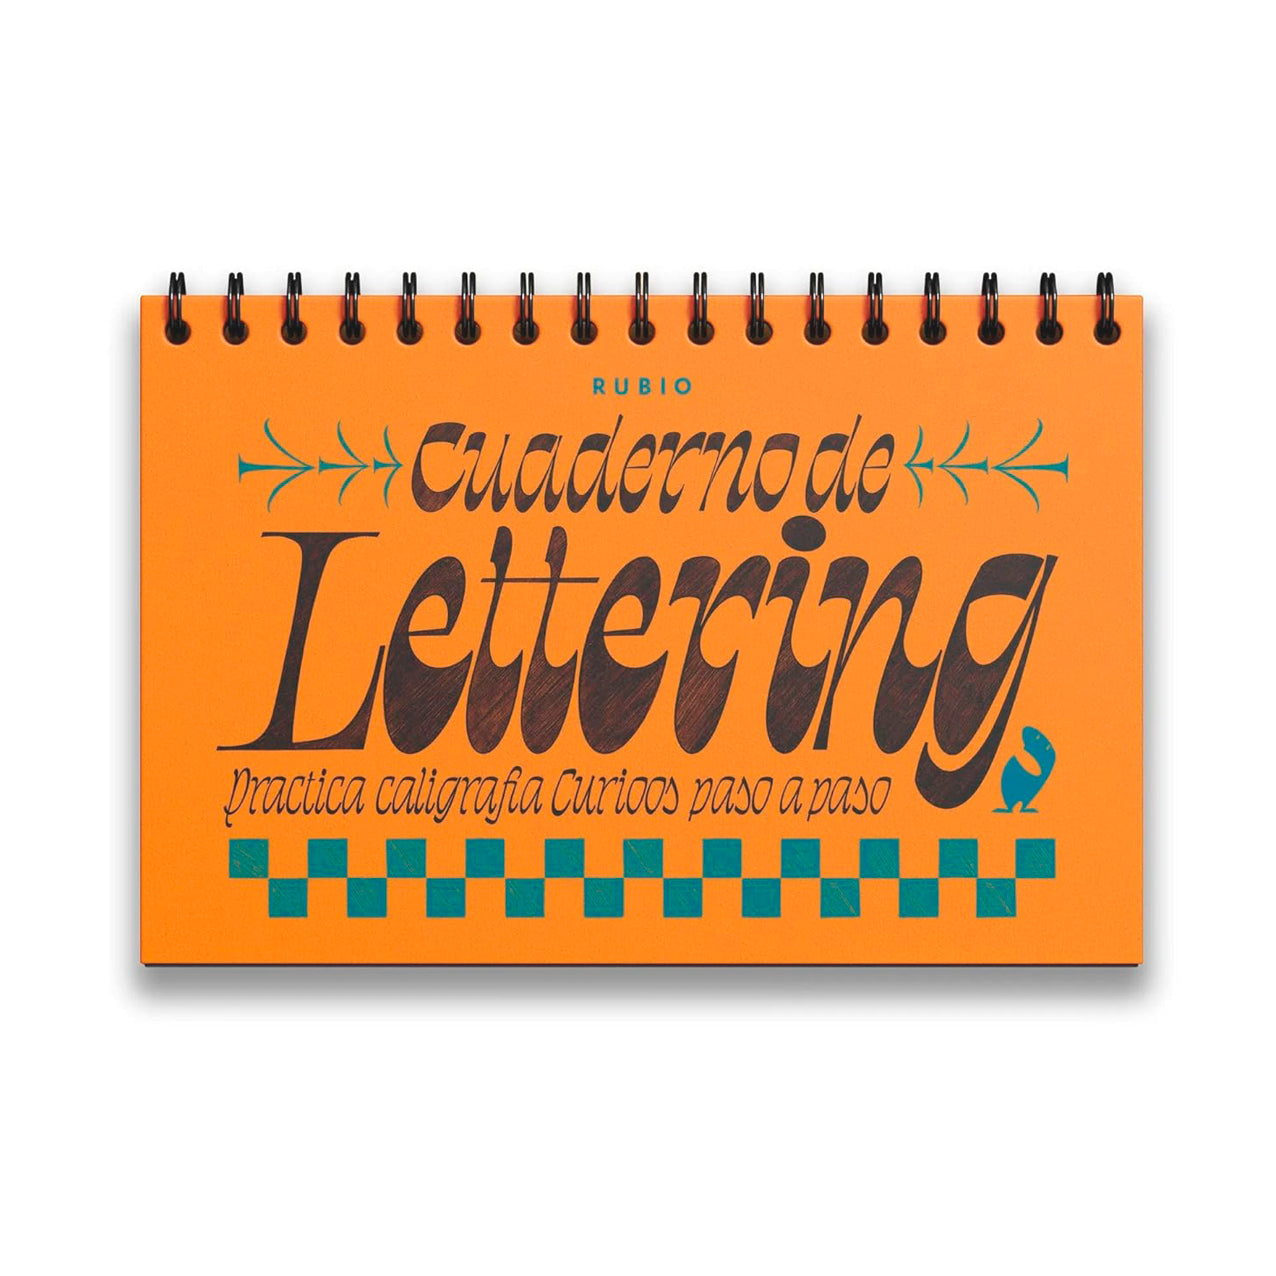 Lettering notebook. Practice calligraphy Curioos